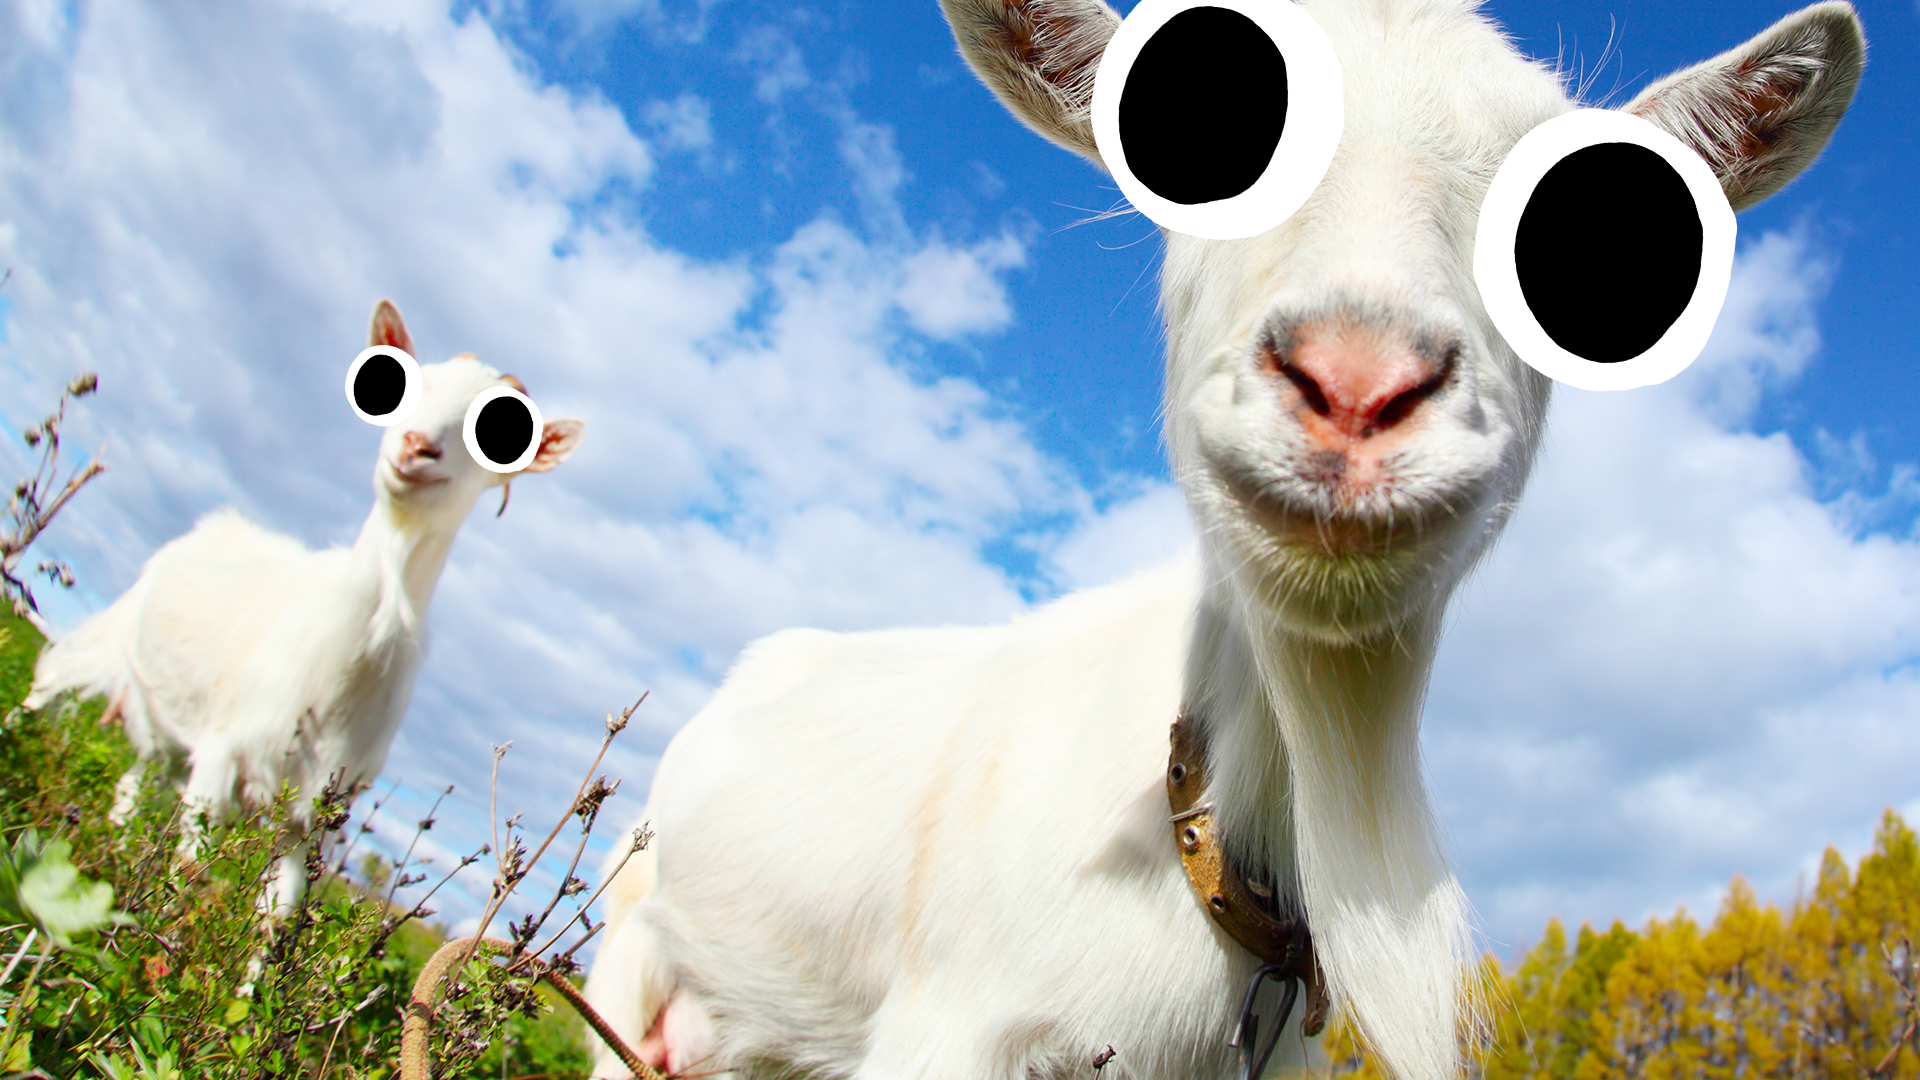 Goats in field with googly eyes